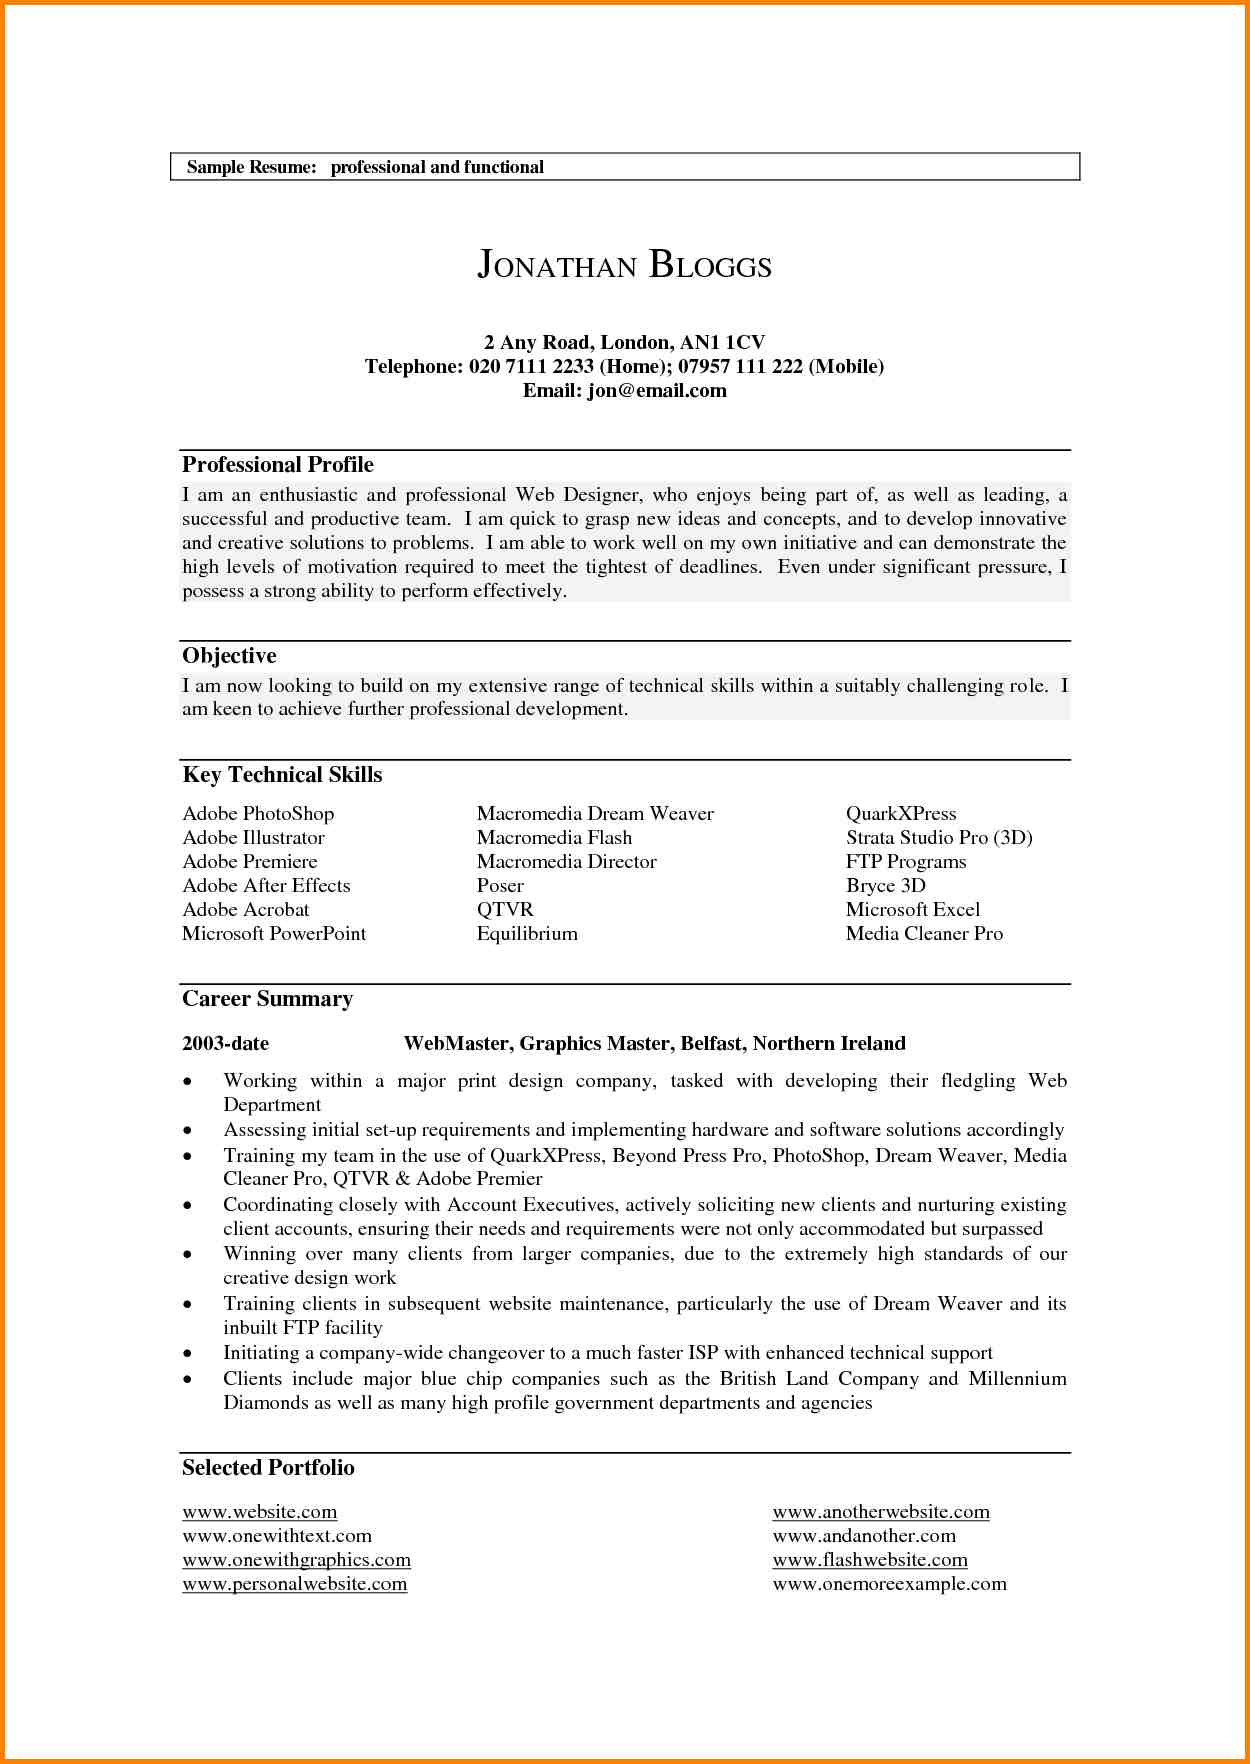 12 resume profile section examples